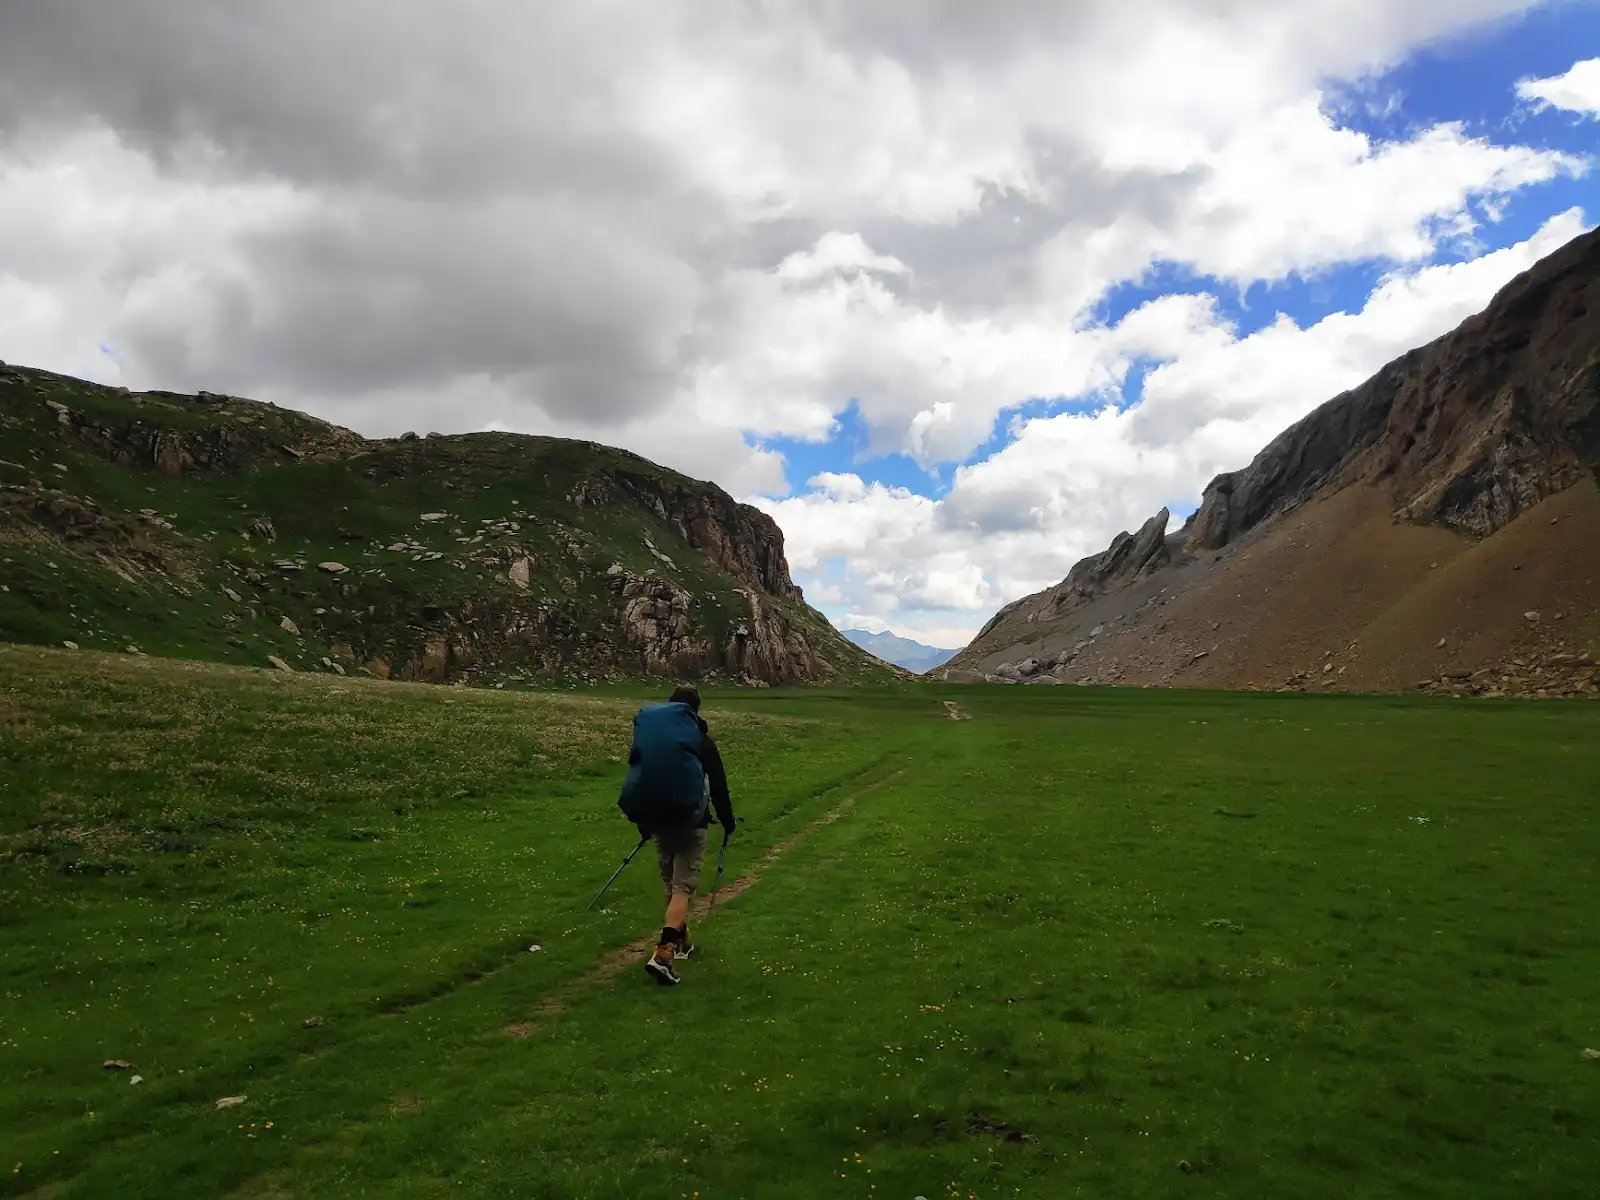 hiking the last stage of the official La senda de camille trail